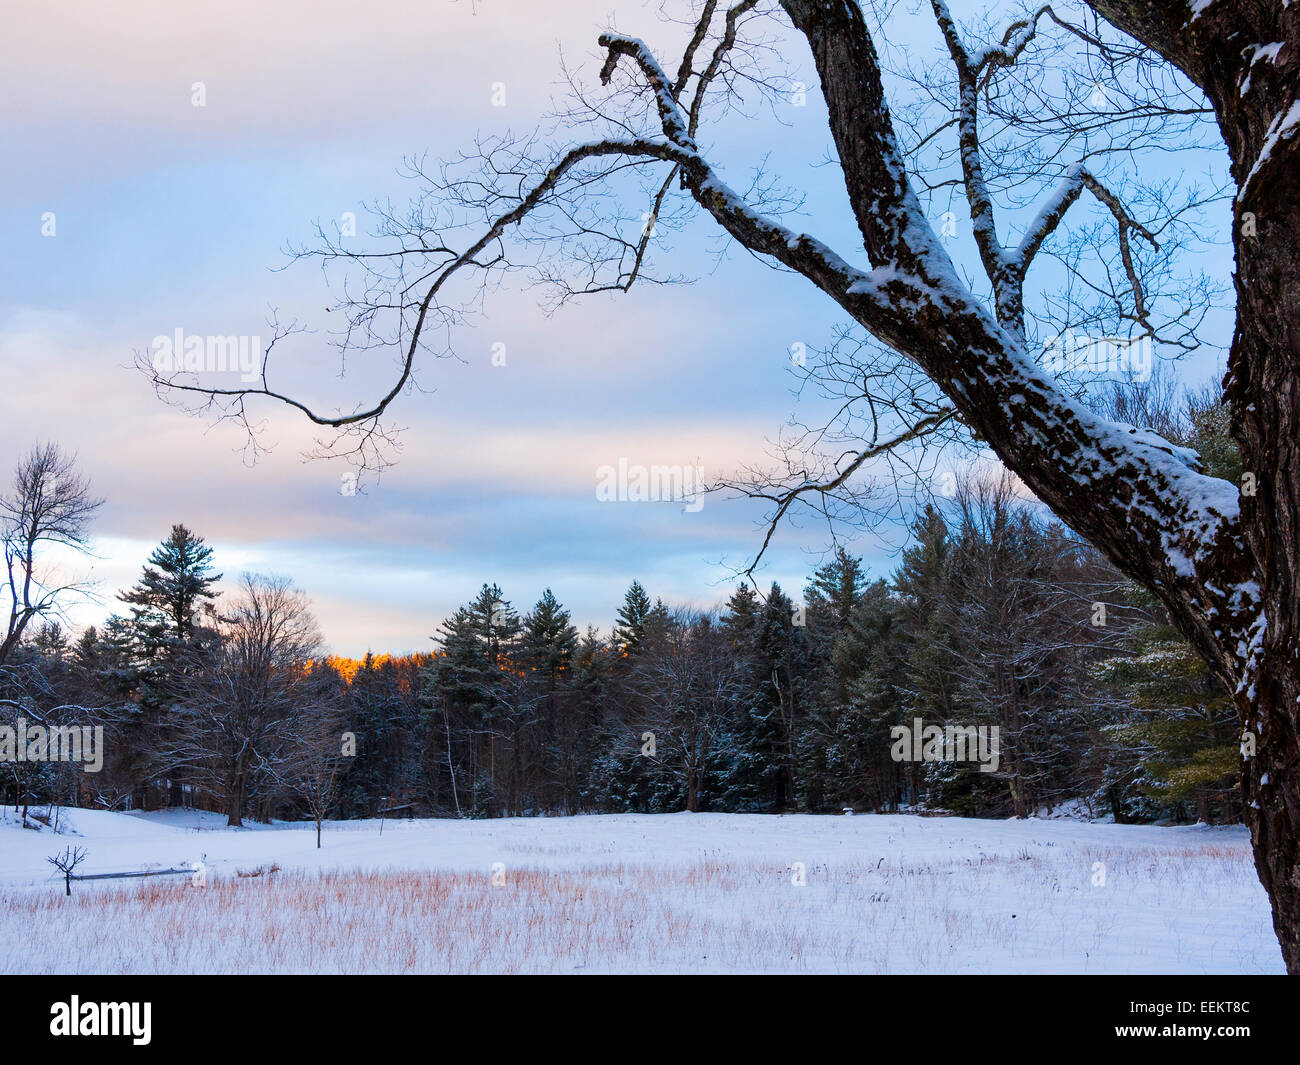 Rural meadow in snowy winter landscape scene in the country. Stock Photo